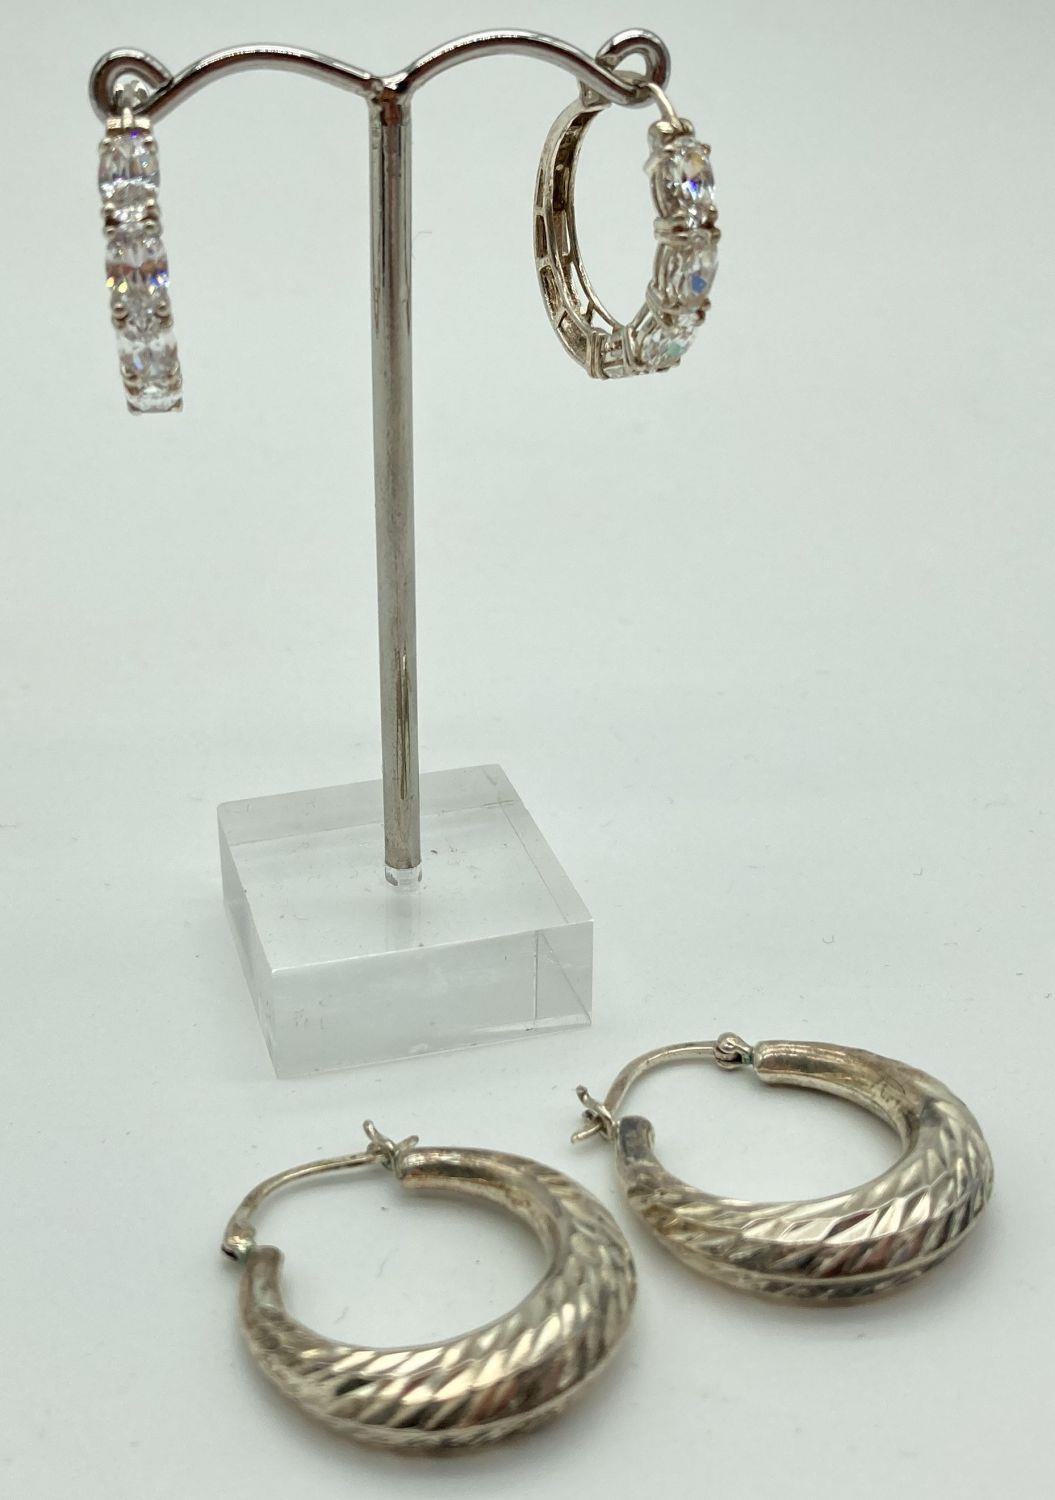 2 pairs of silver hoop style earrings. One pair with a diamond cut design the other set with oval